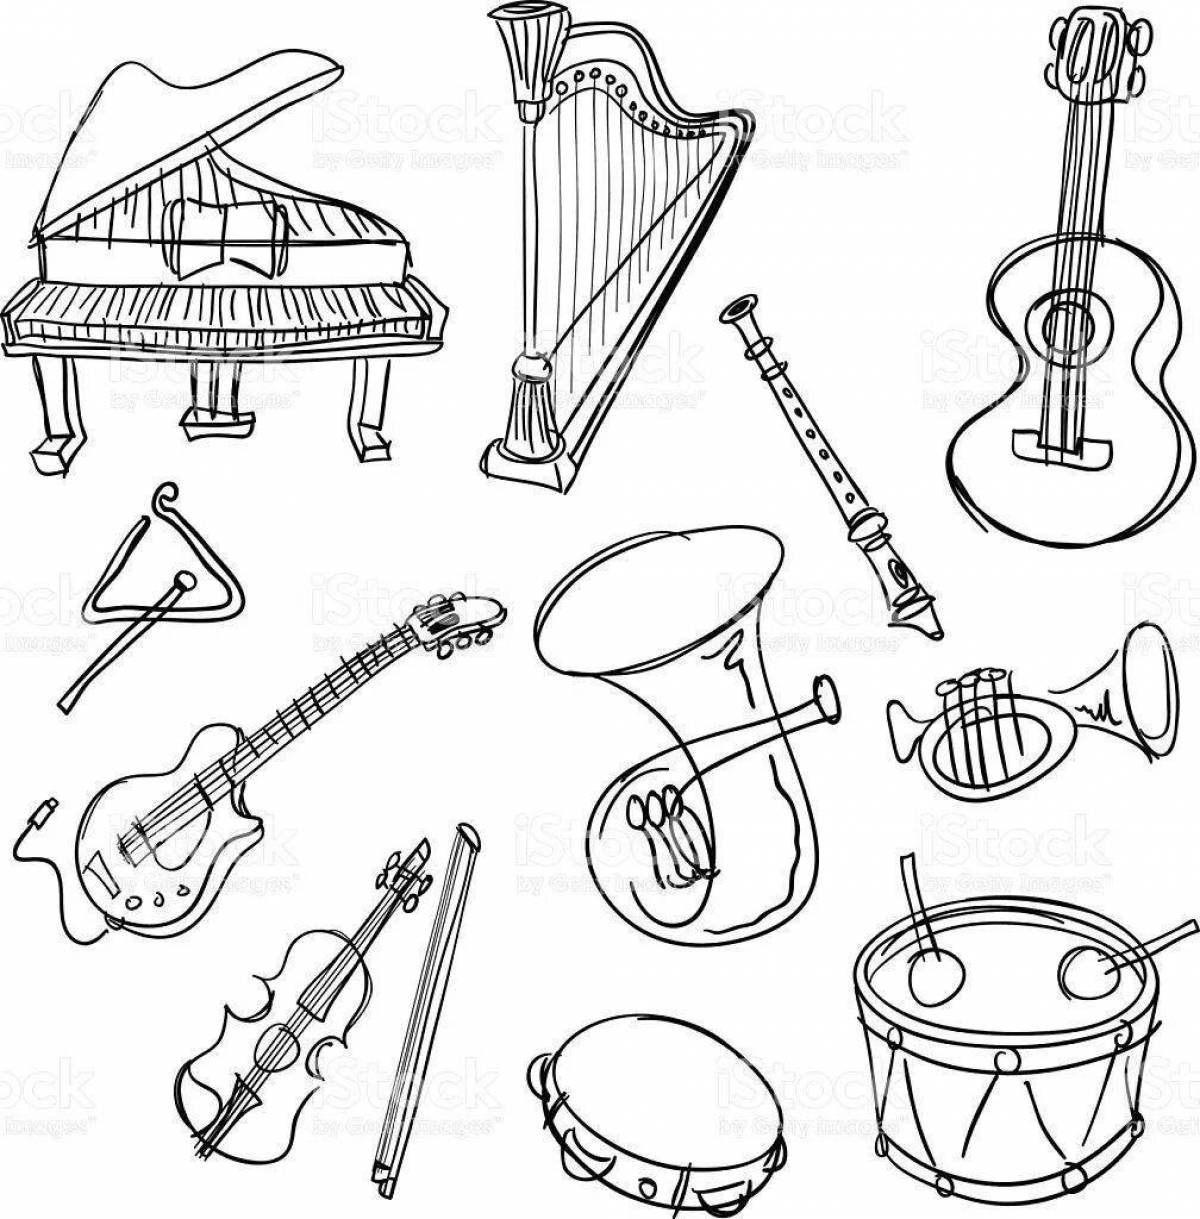 Adorable musical instruments coloring book for preschoolers